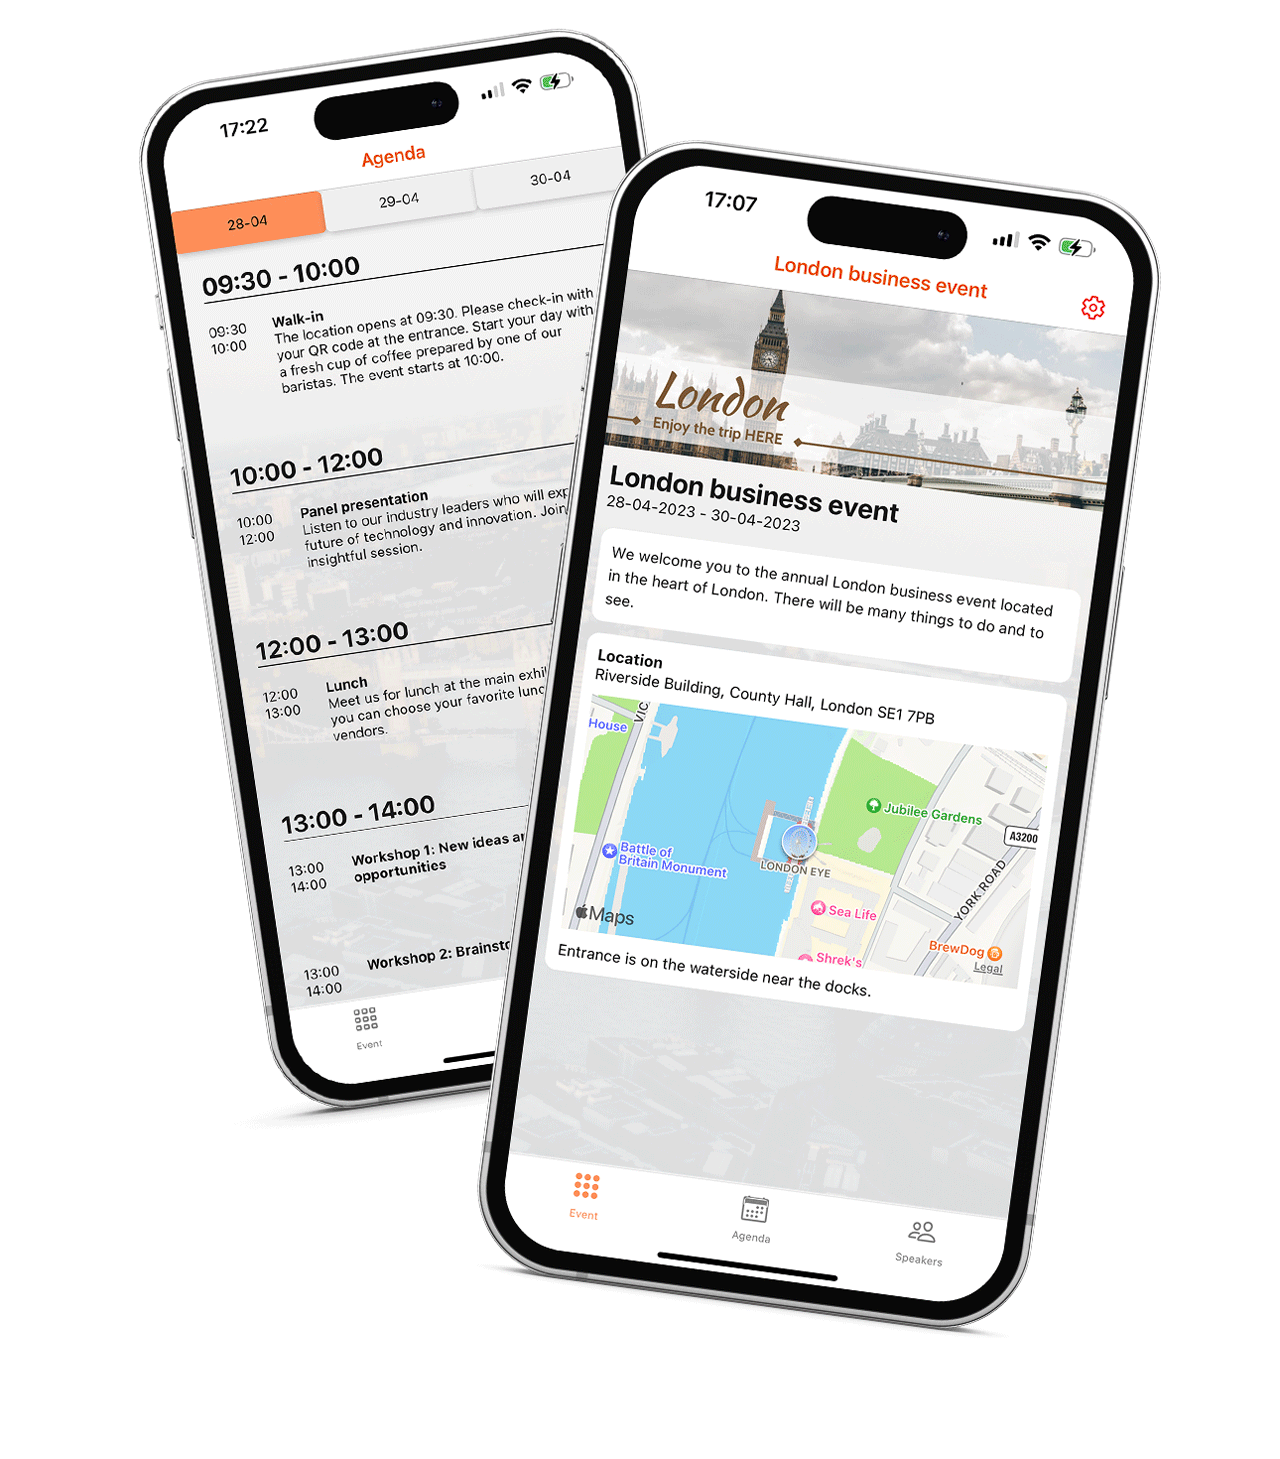 Example of digital event agenda on IPhone and location of event